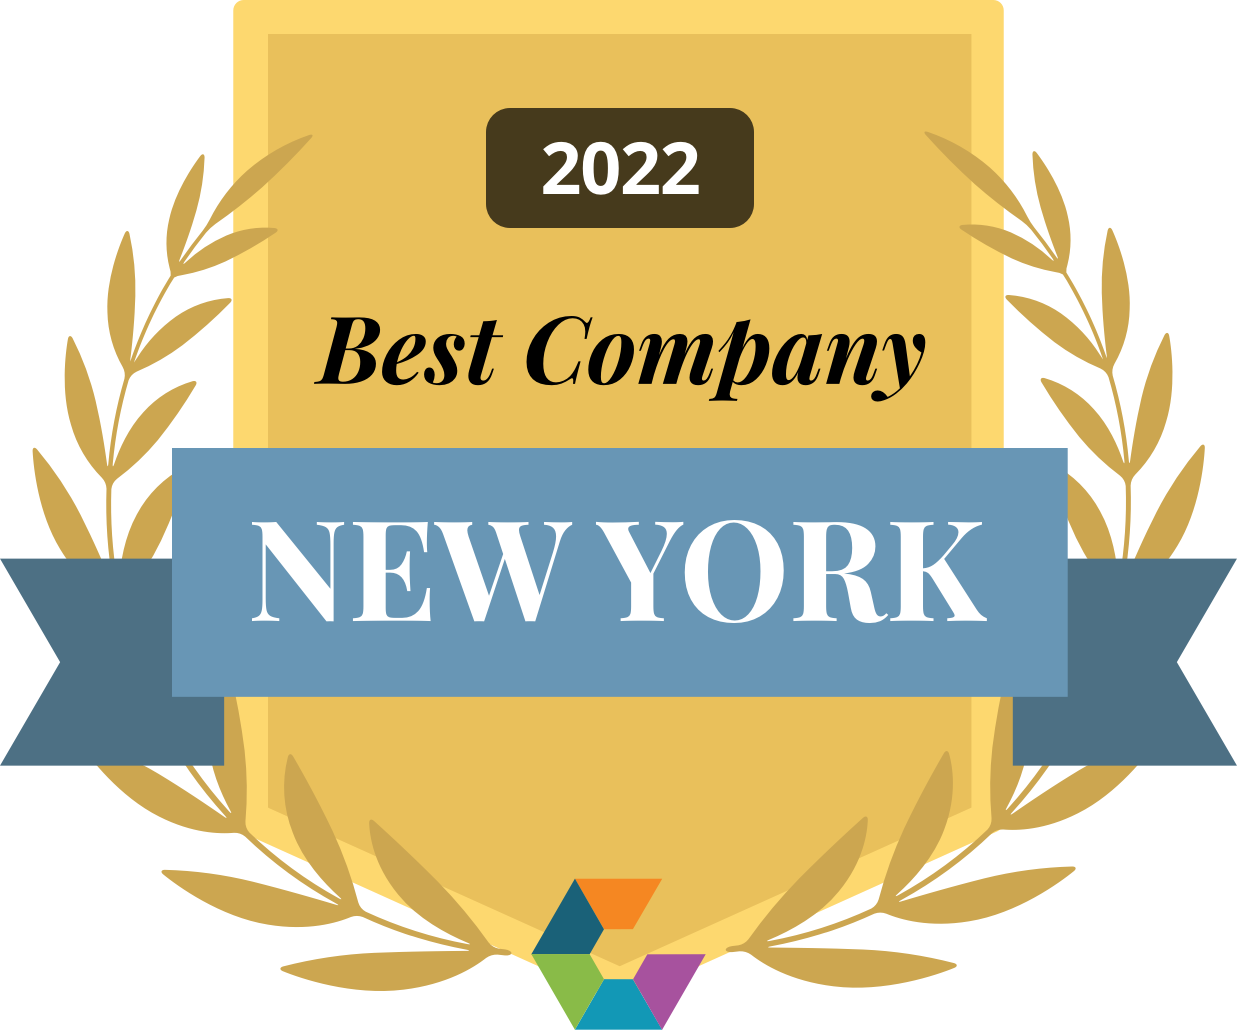 Comparably Award winner for “One of The Best Places to Work” 2022